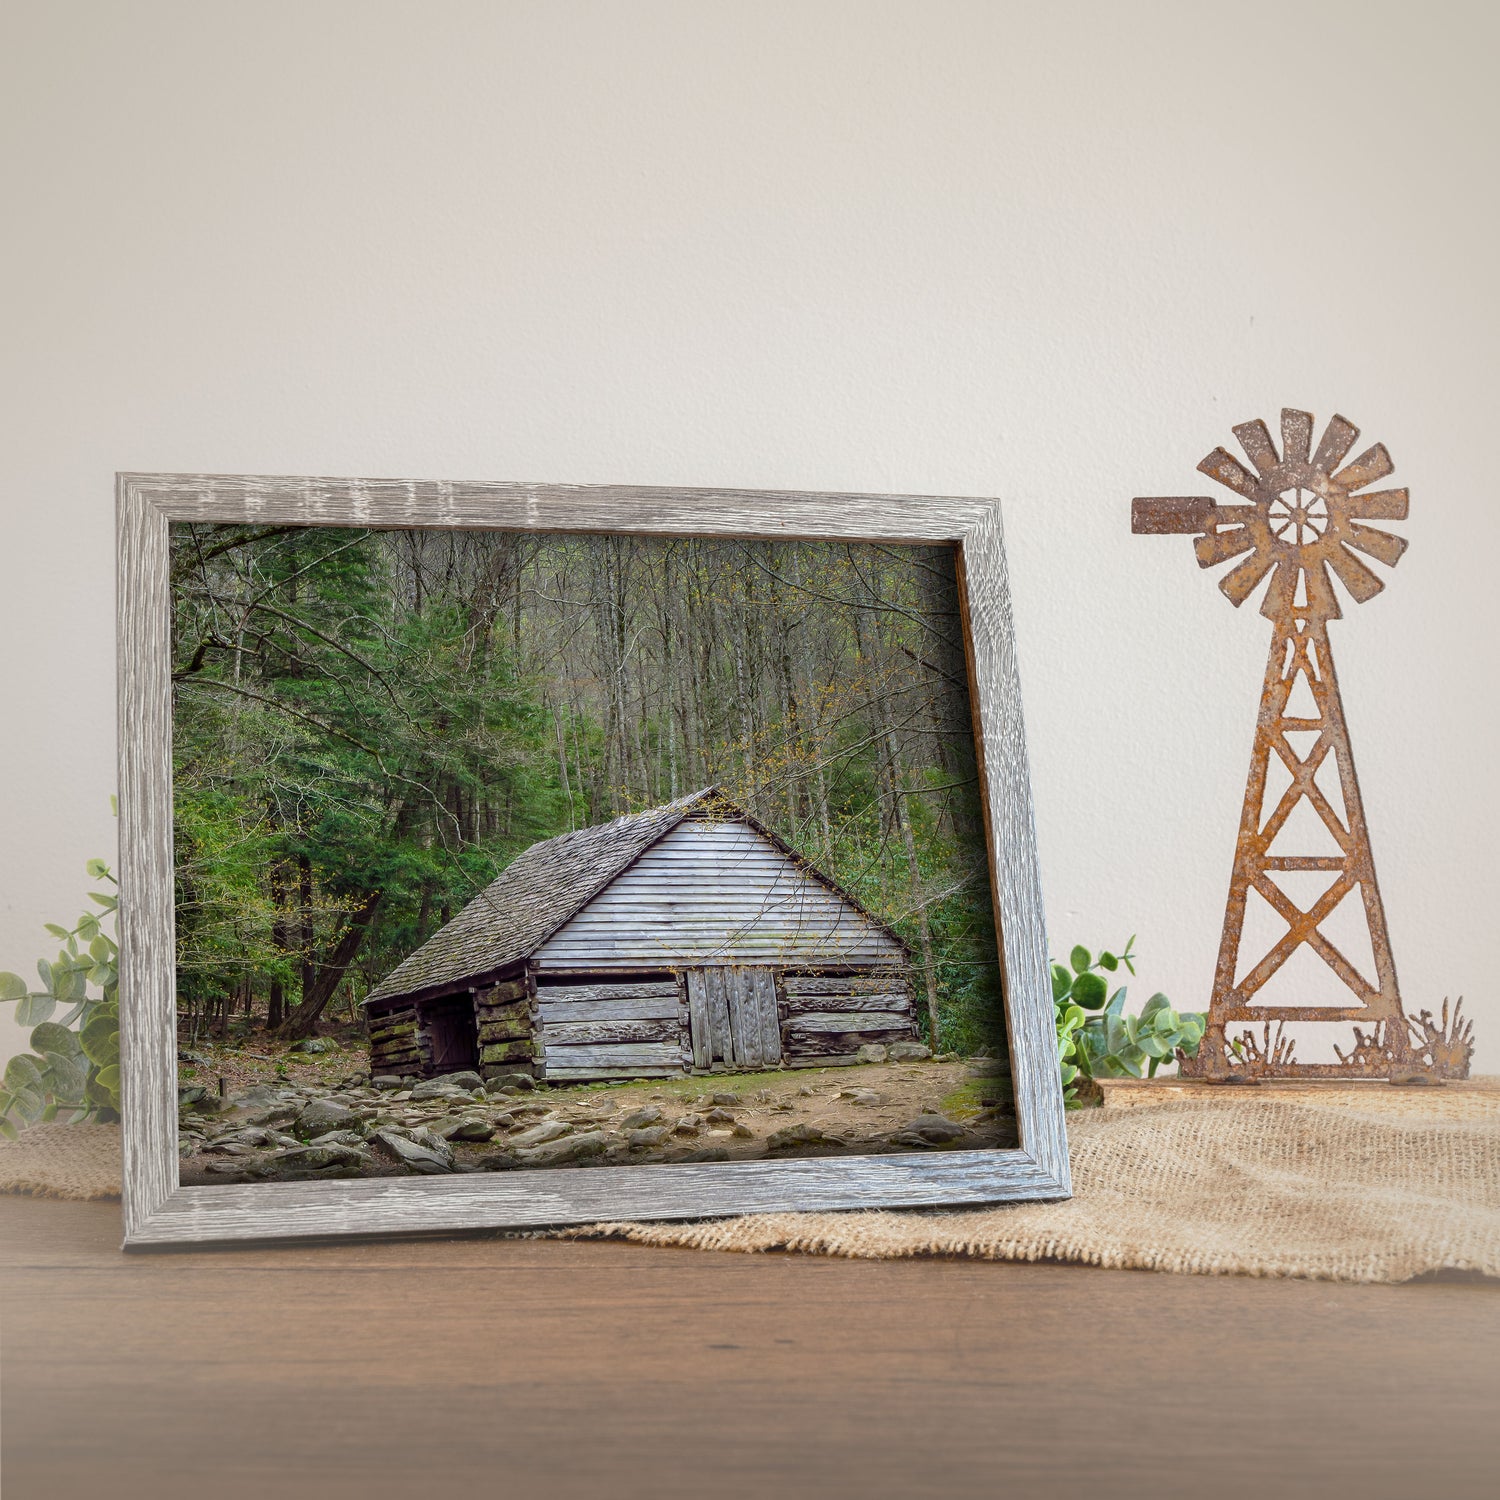 Rustic farmhouse wart print of the historic Bud Ogle Barn in Tennessee, nestled within a lush forest. The barn is in the foreground with detailed forest scenery surrounding it.